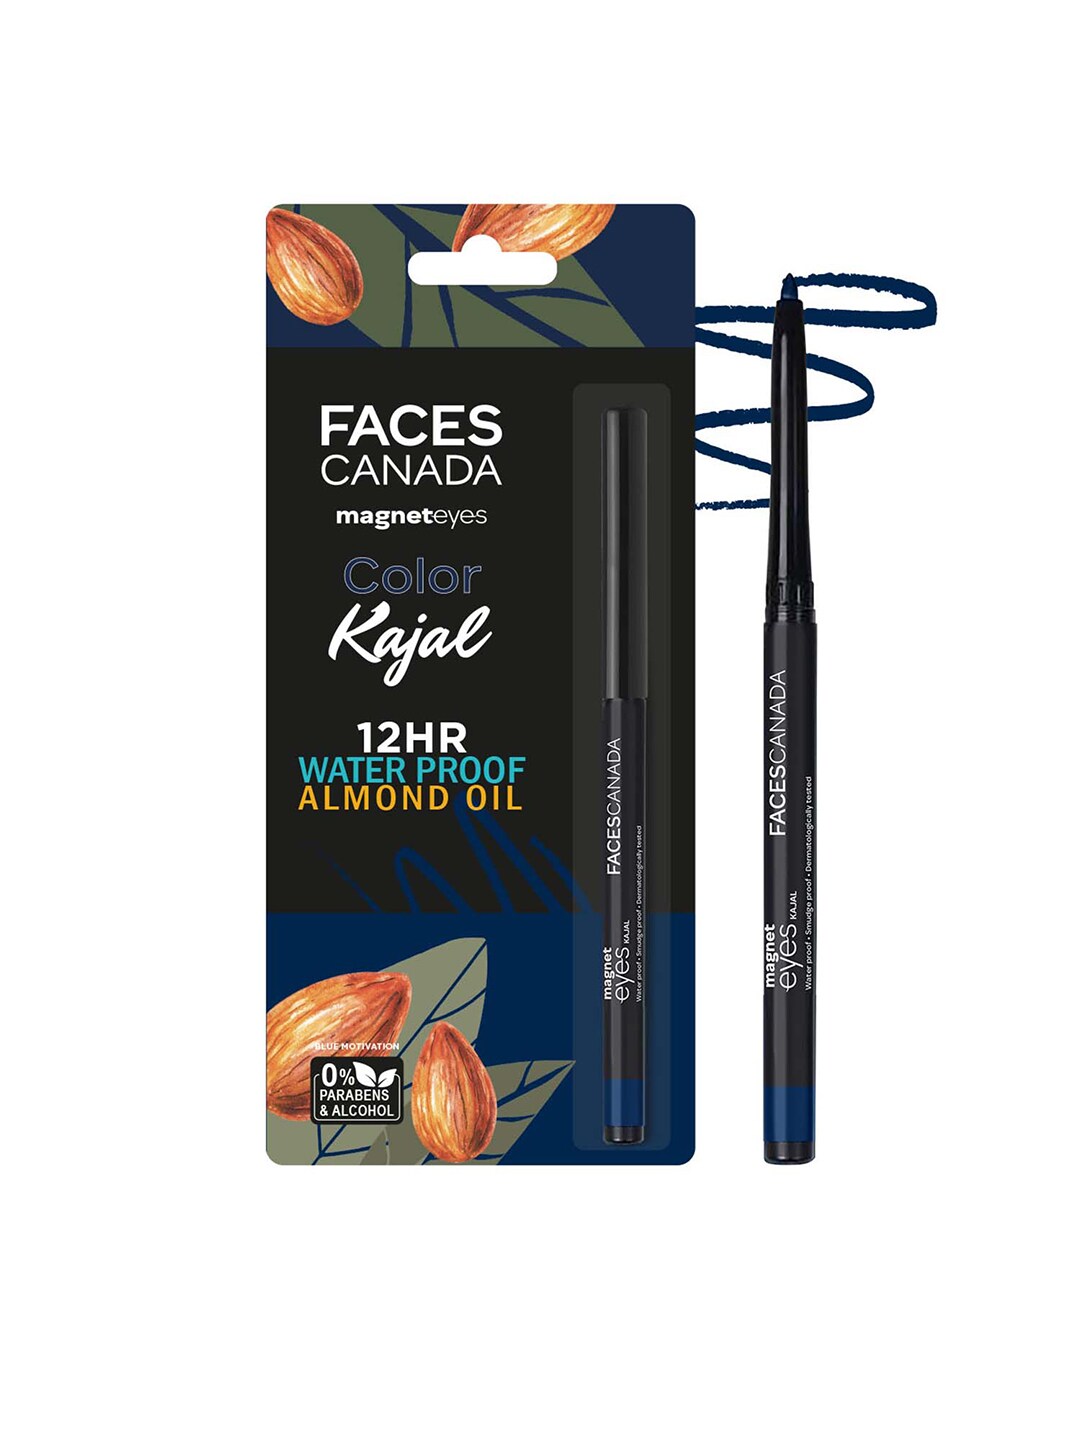 FACES CANADA Magneteyes Waterproof Color Kajal - Blue Motivation 01 Price in India